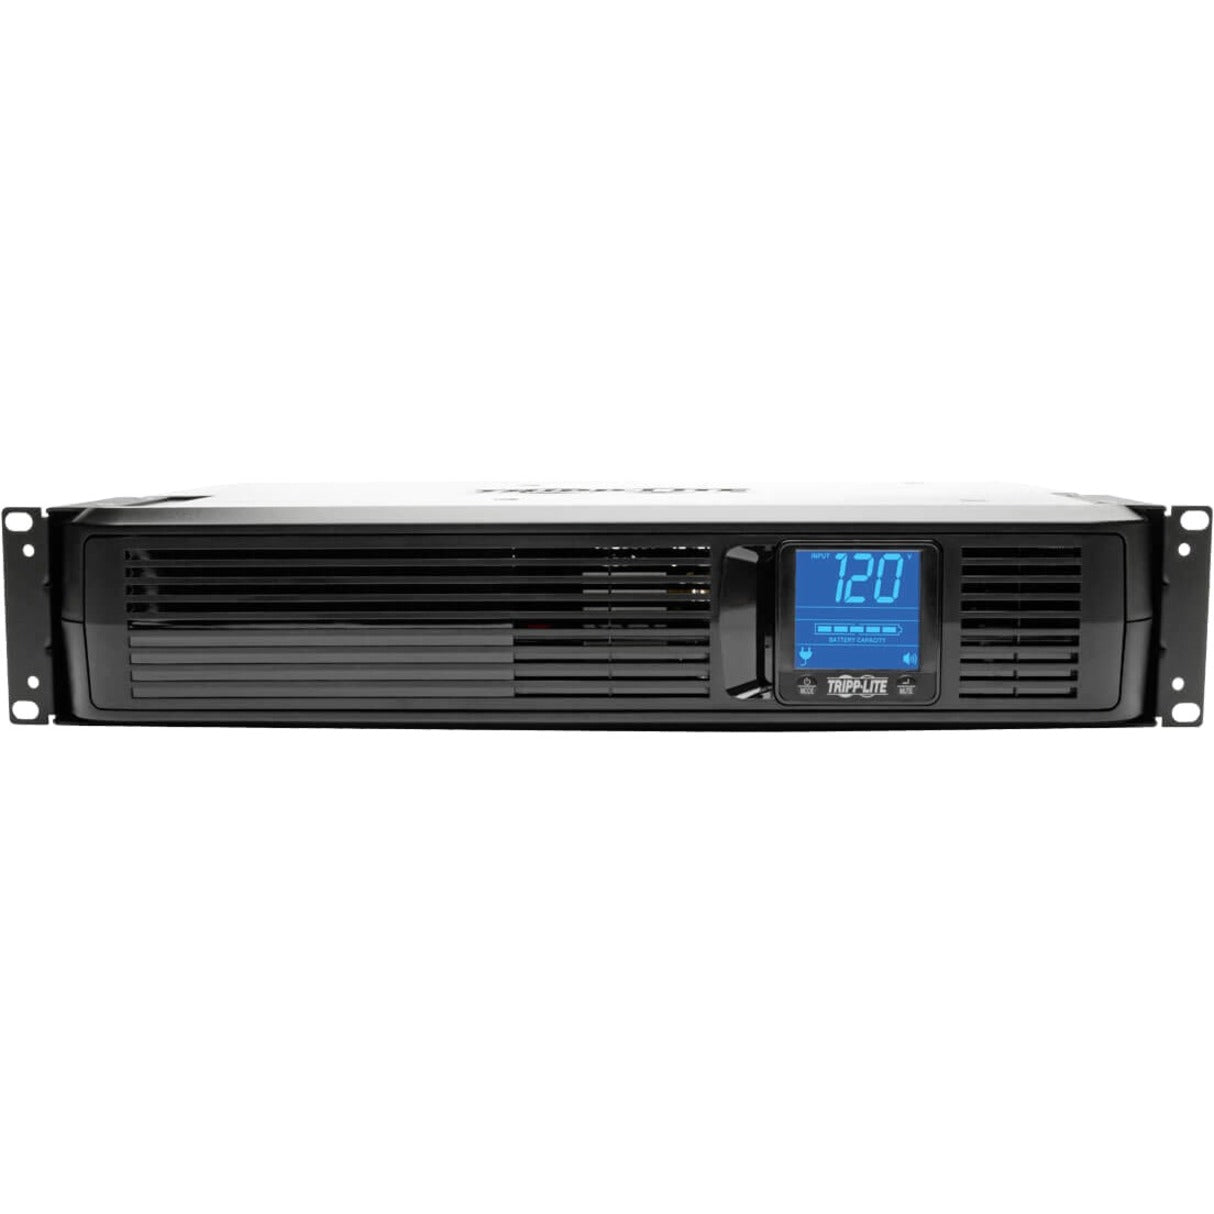 Tripp Lite SMART1500LCD SmartPro 1500 VA Rackmount/Tower Digital UPS, Backup Power for Home and Office [Discontinued]